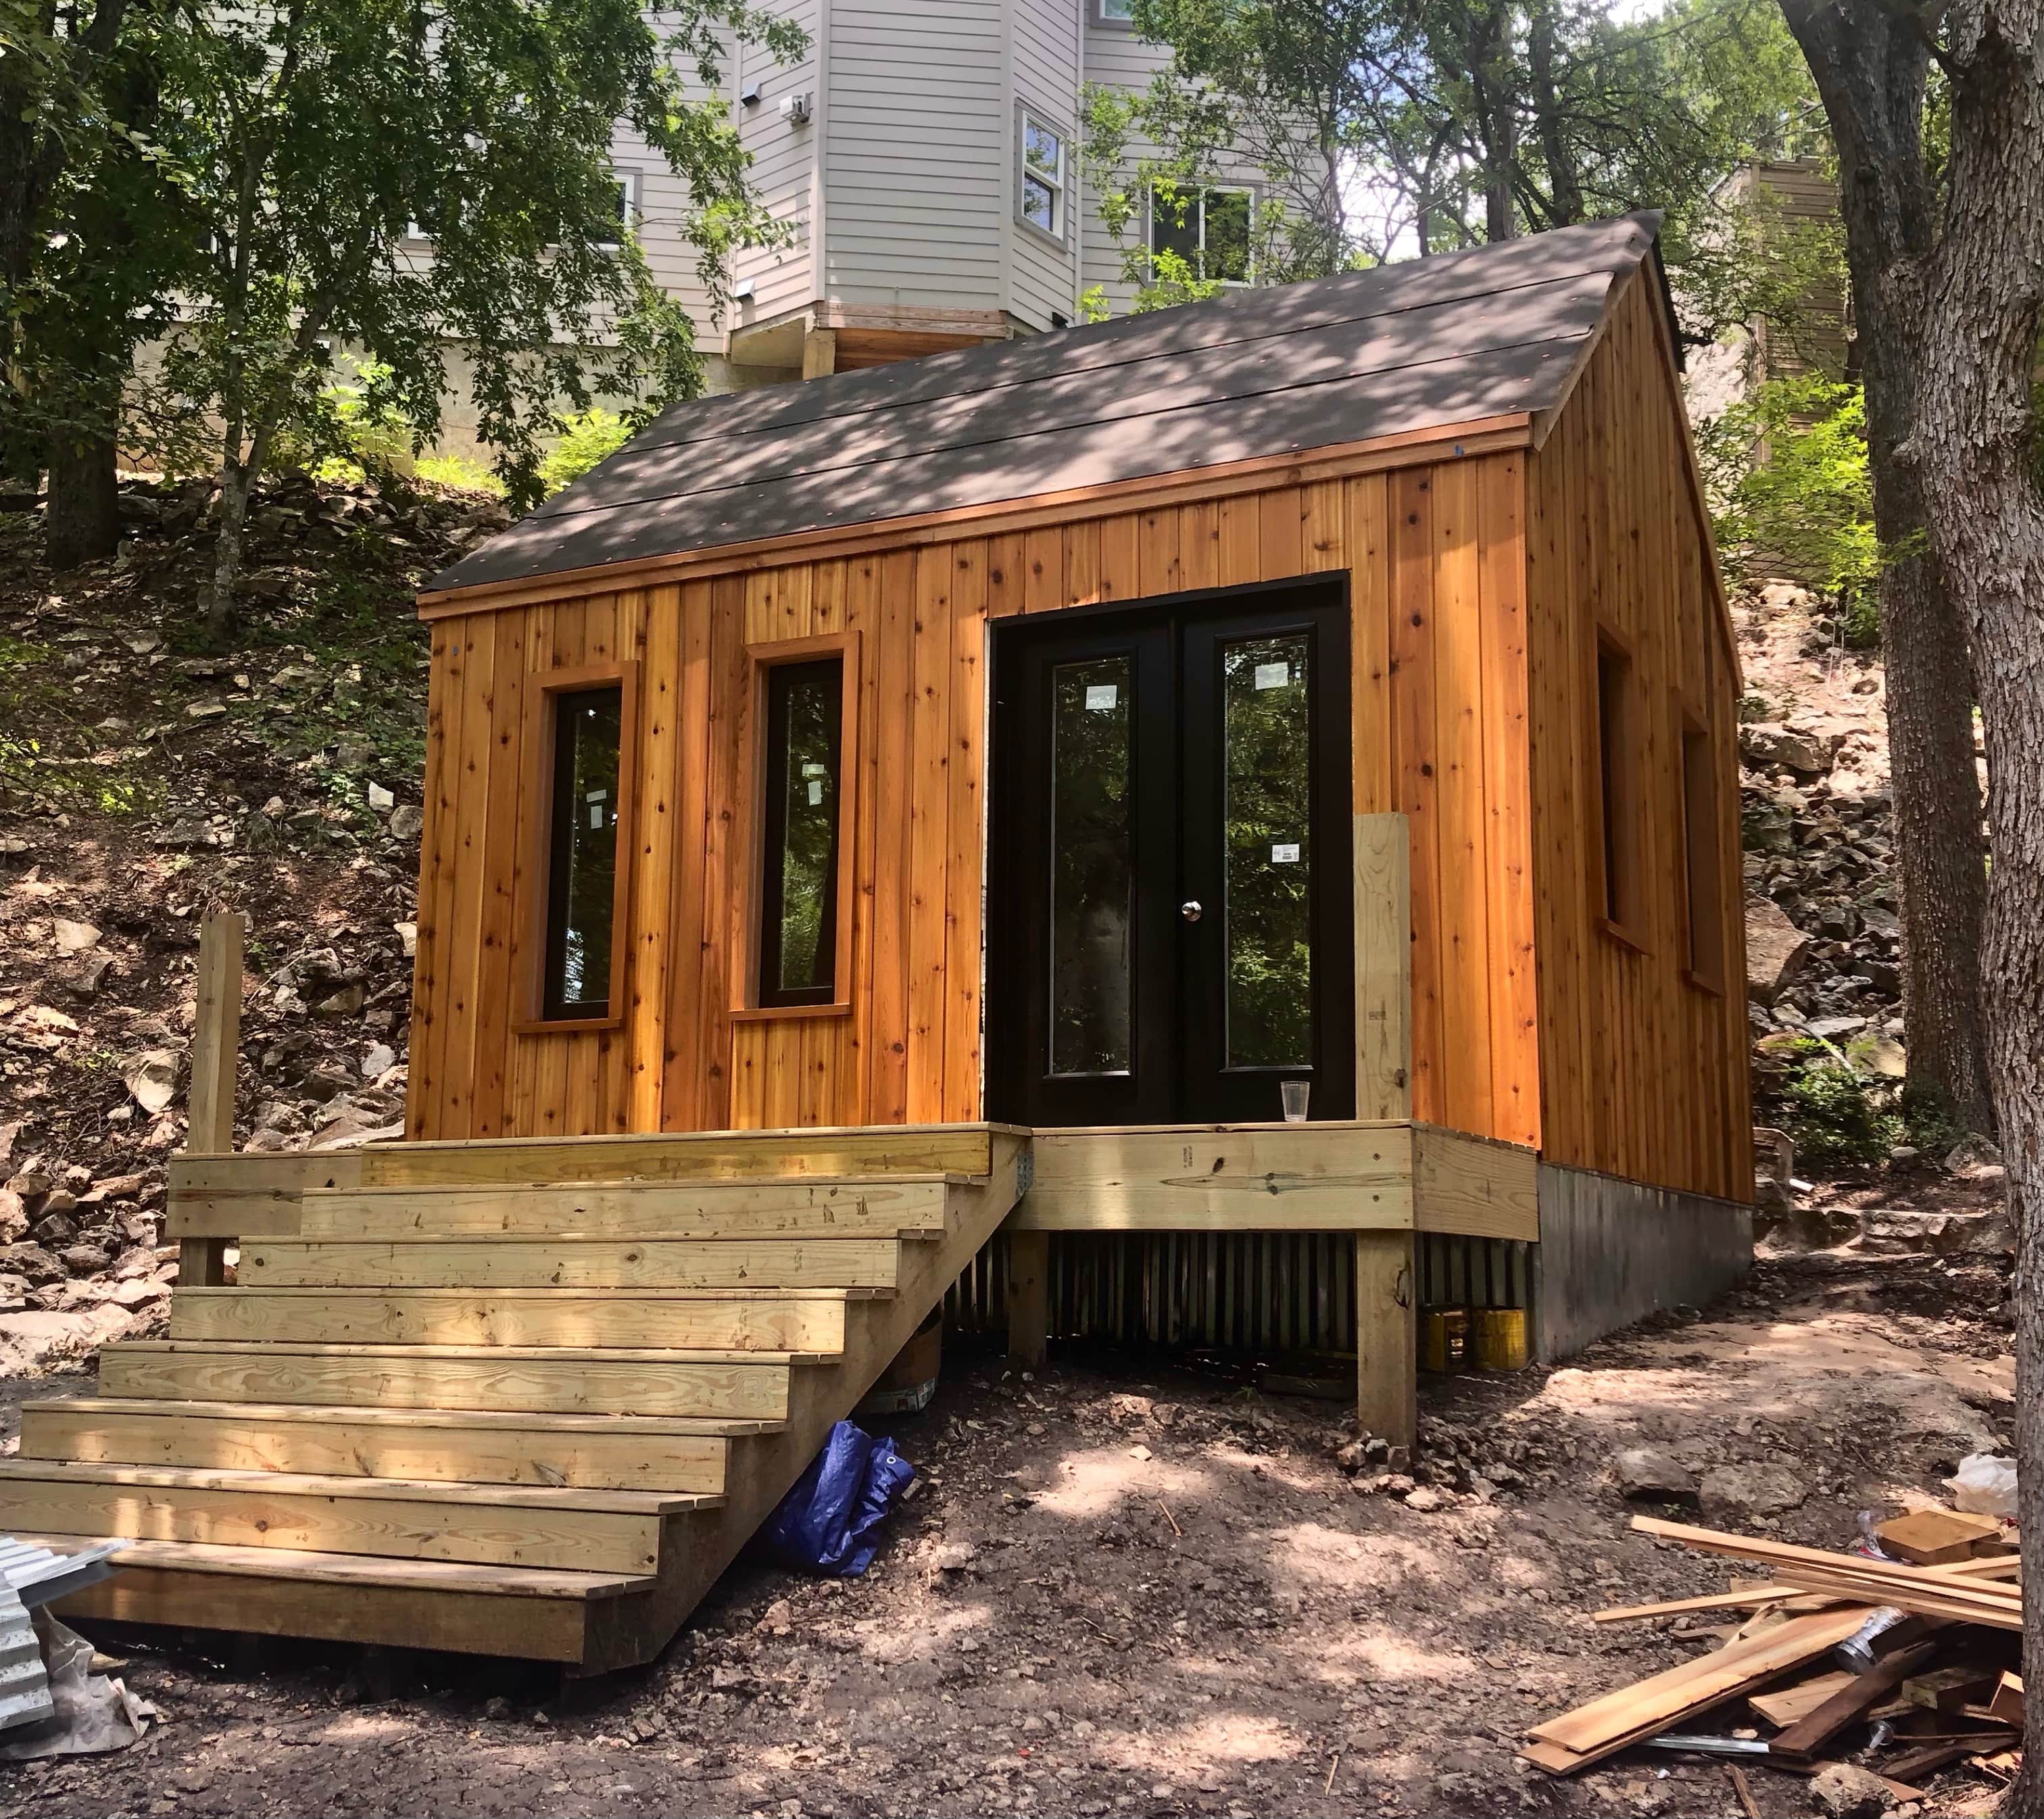 Front view of 12’ x 14' Mini Oban Cabin located in Austin, Texas – Summerwood Products